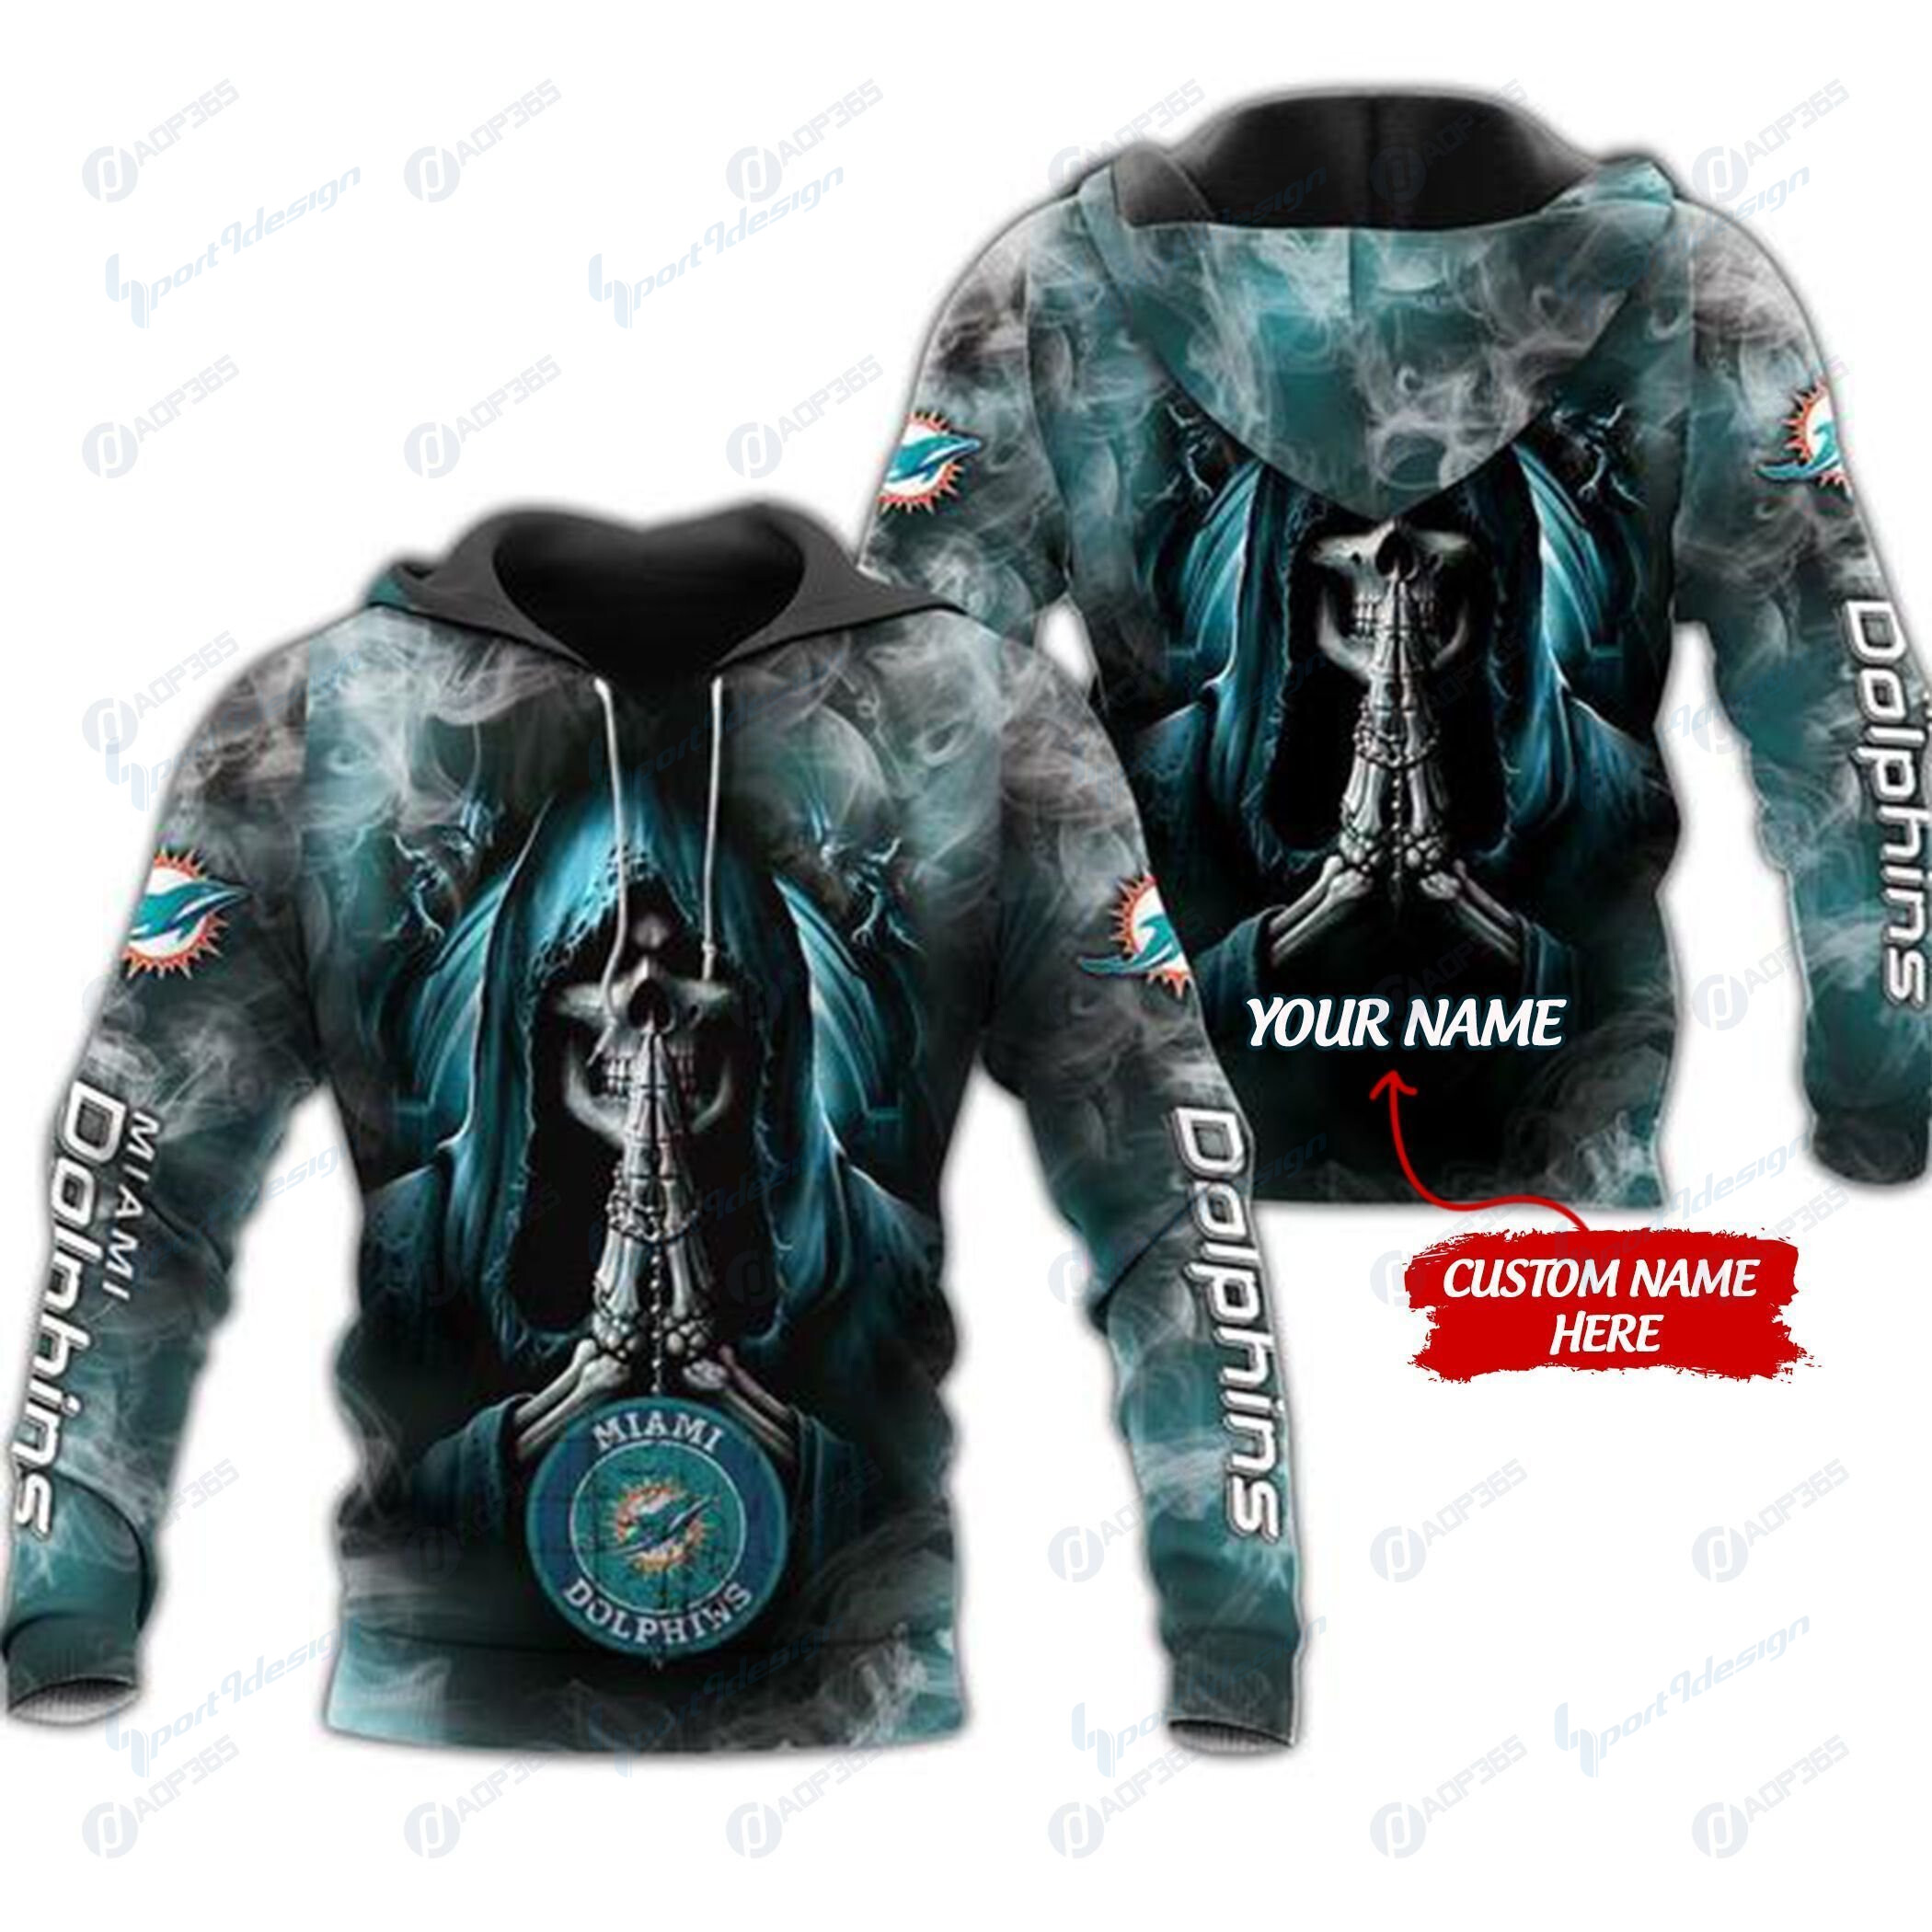 Miami Dolphins Shop - Miami Dolphins Personalized All Over Printed Hoodie 3D V1